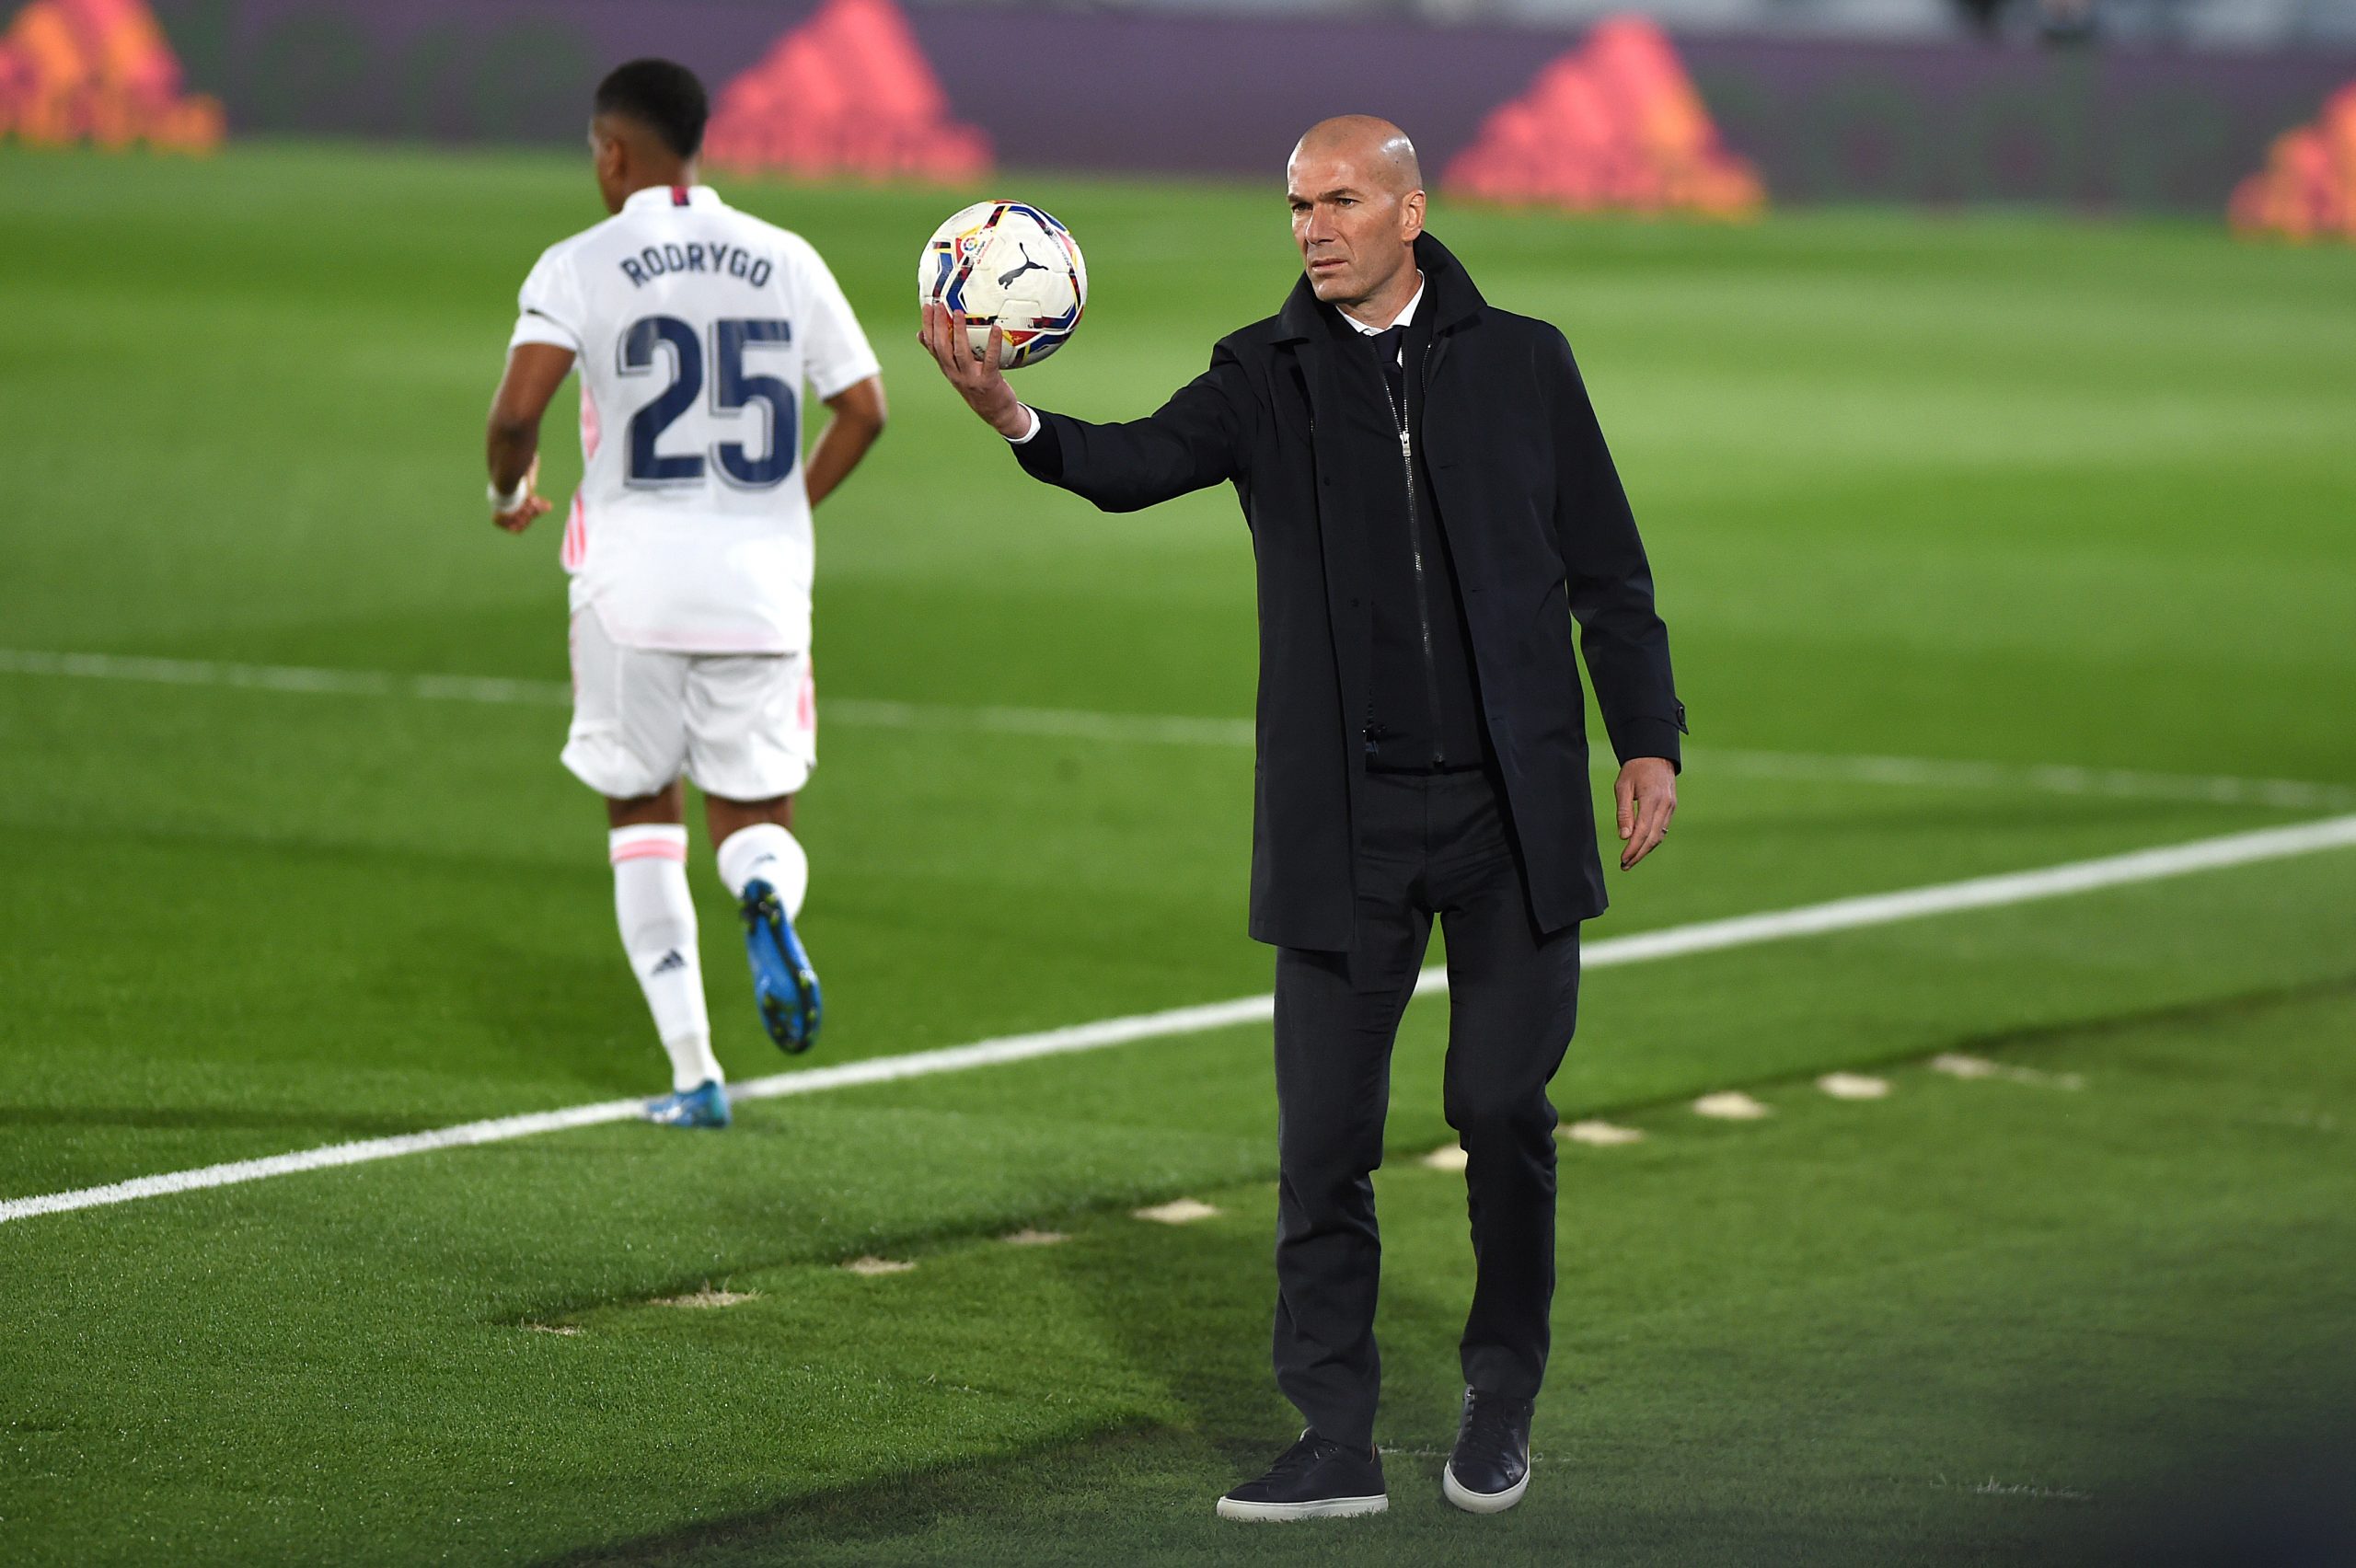 Zinedine Zidane is open to joining Manchester United but his wife, Veronique, is opposed to the move.